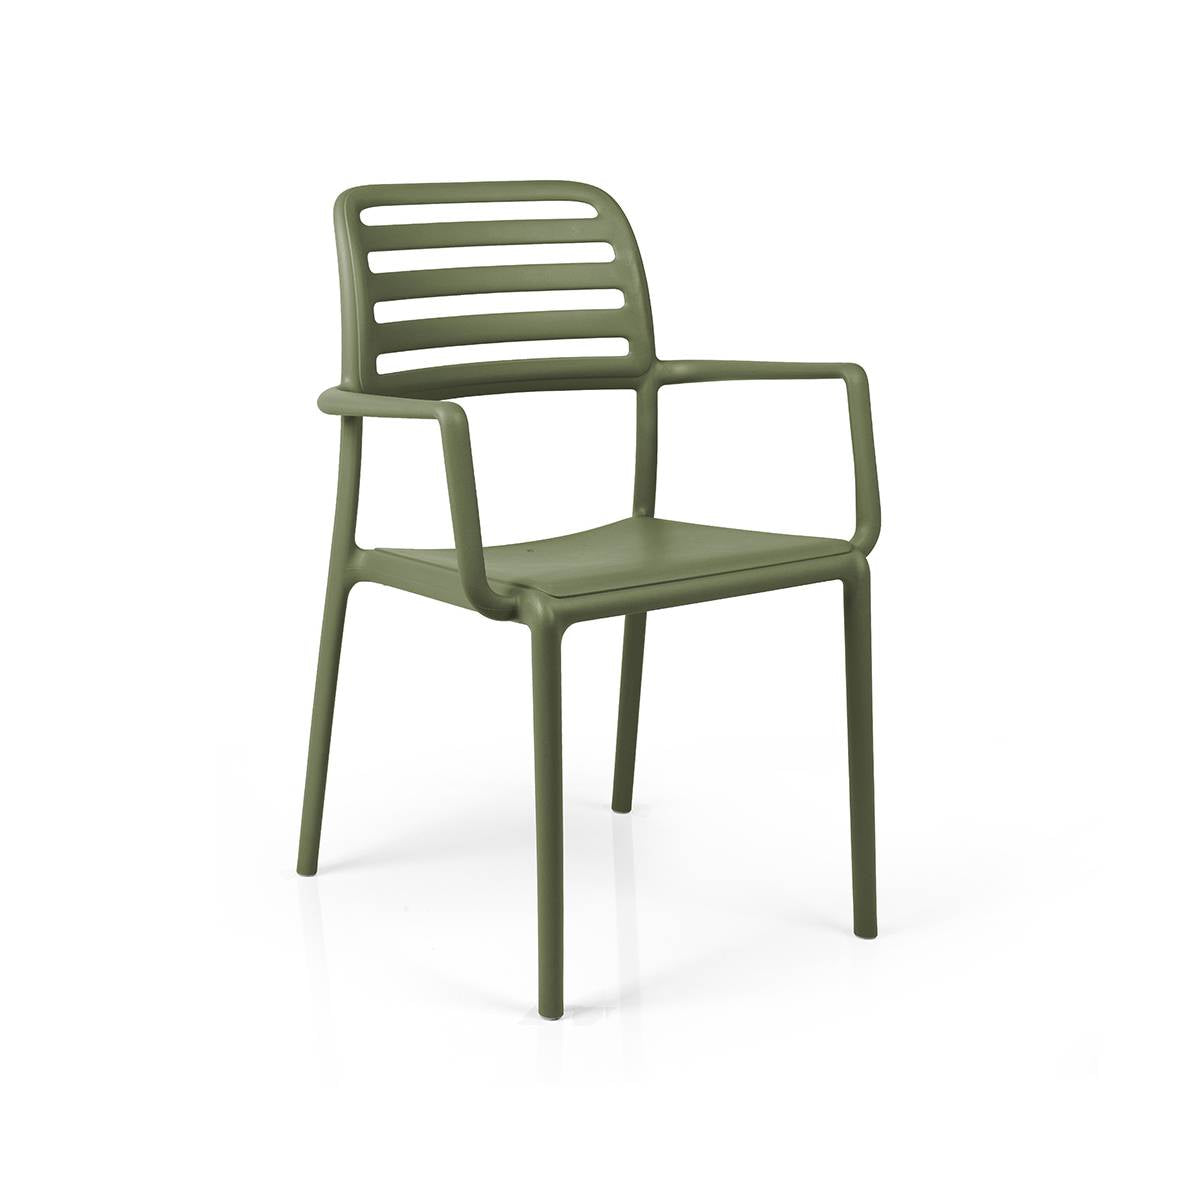 Costa resin chair with armrests - Nardi